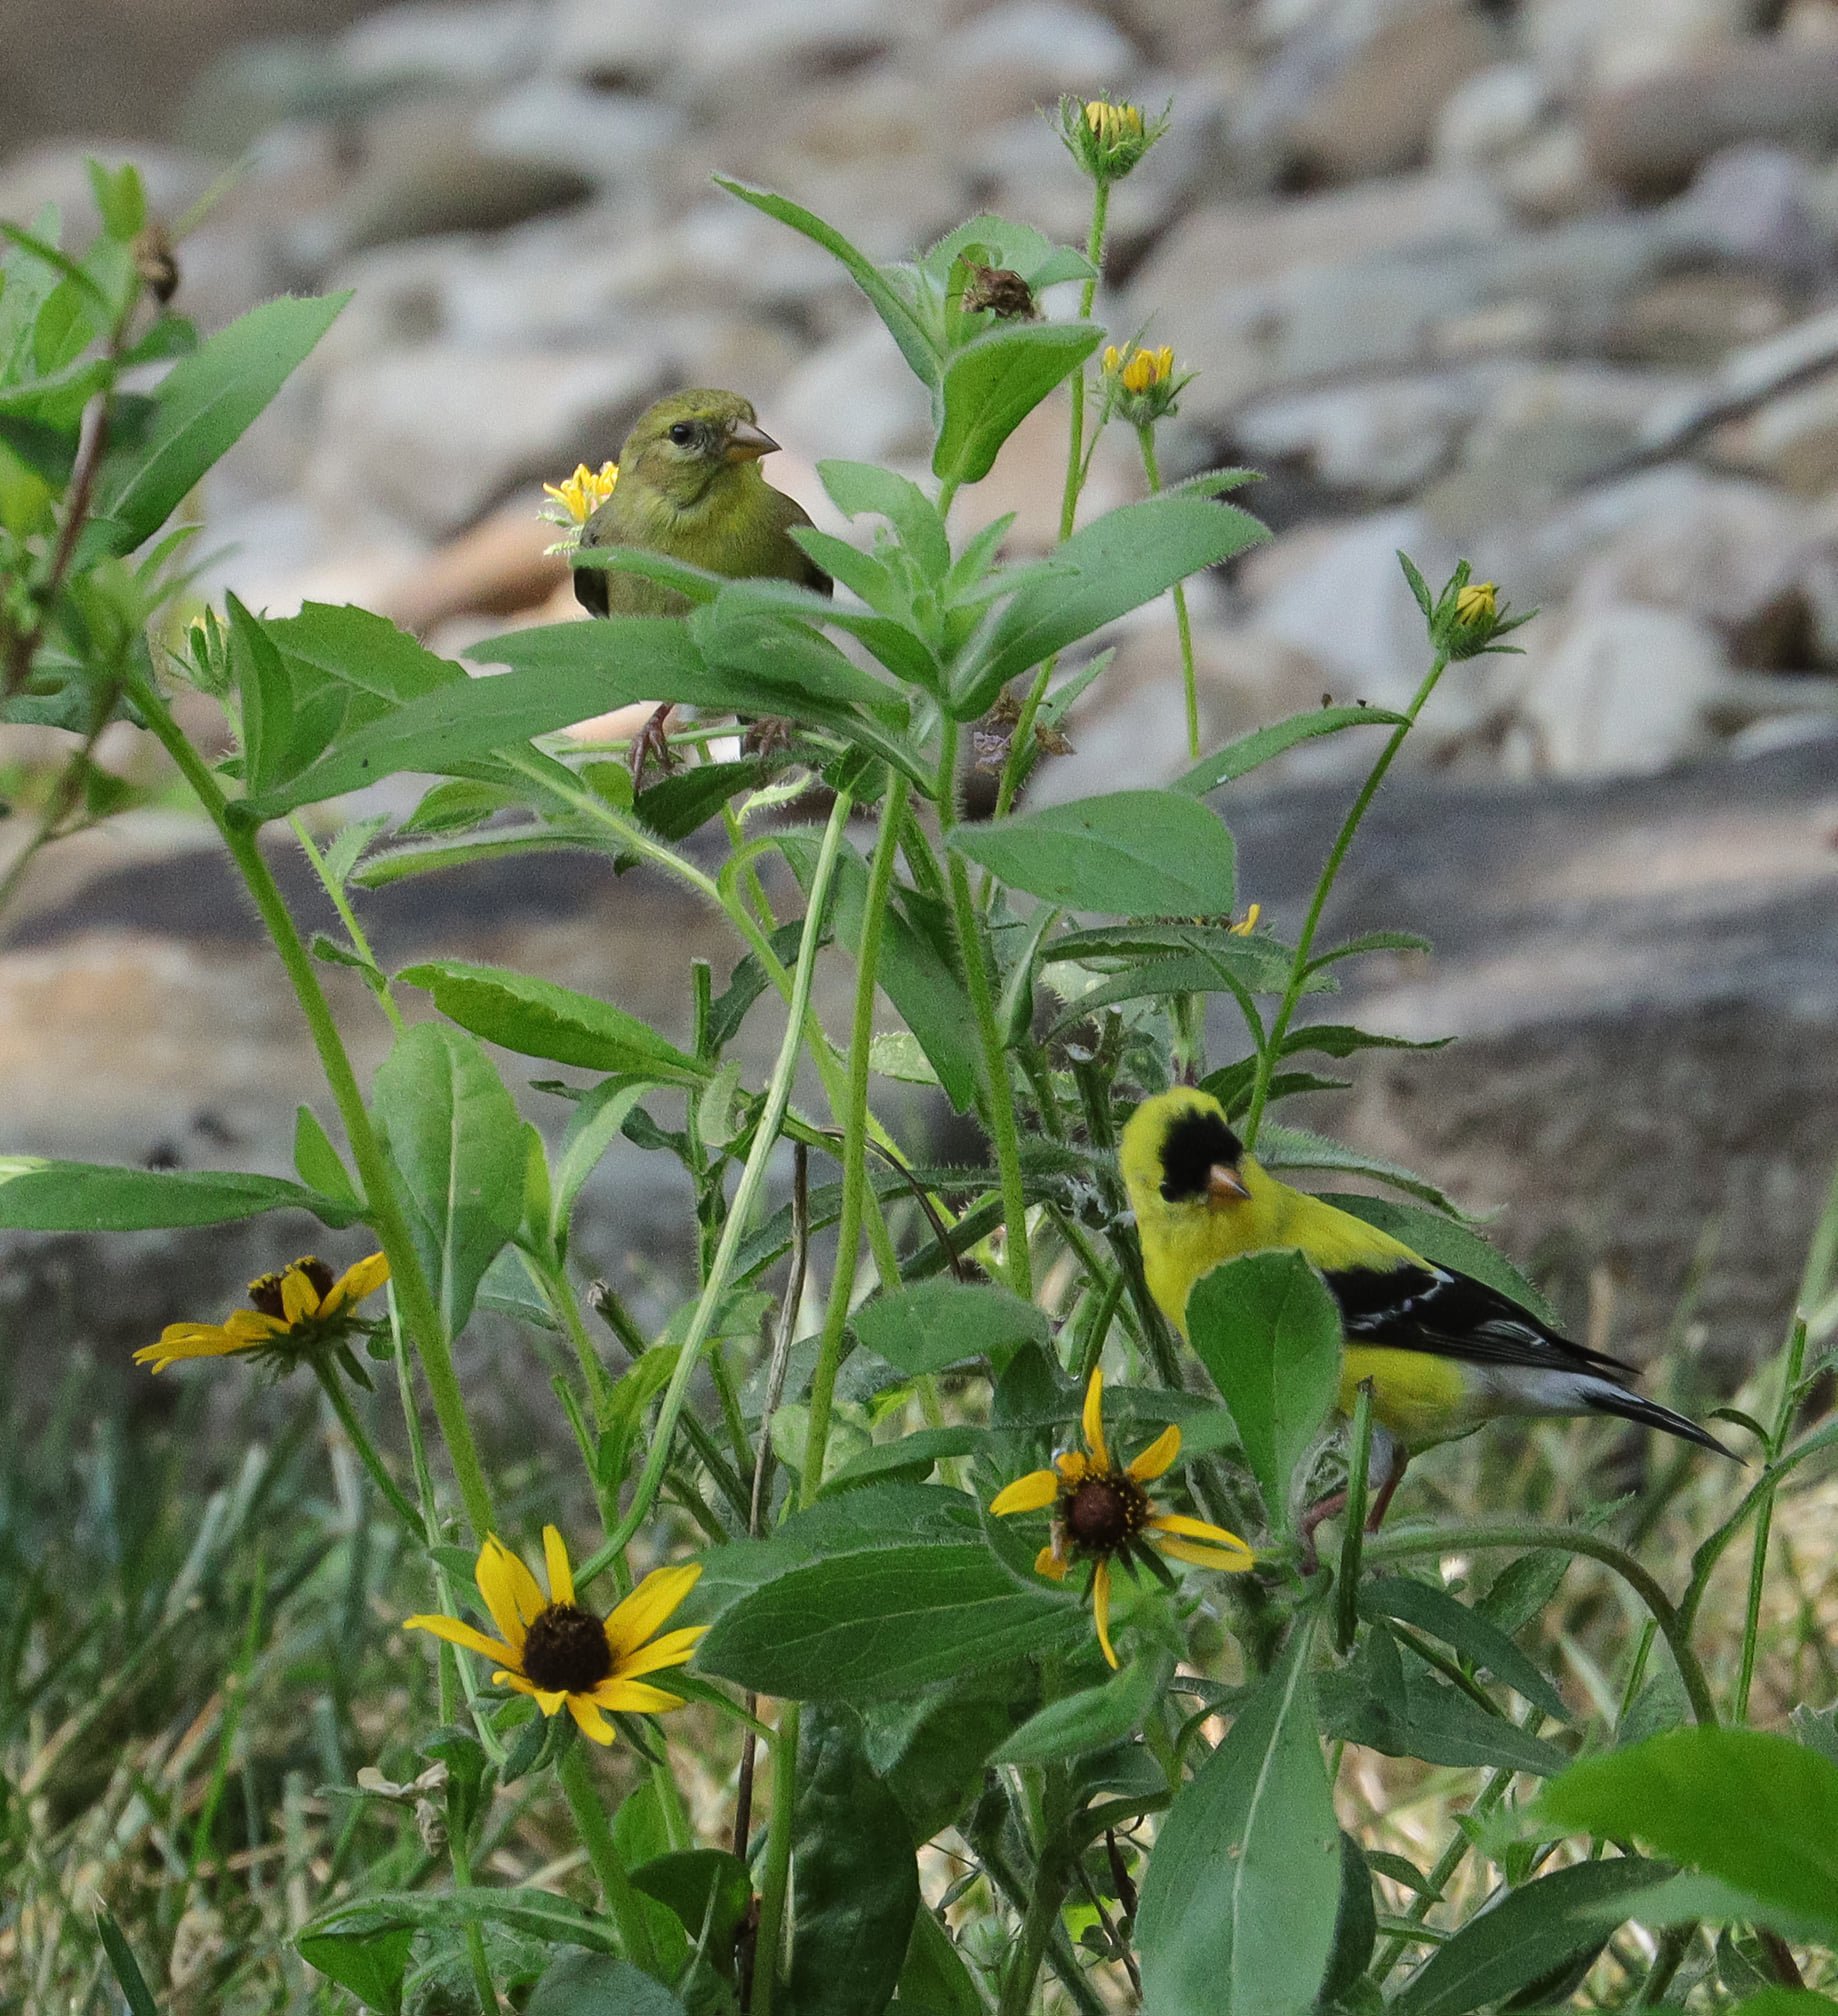 American Goldfinch family